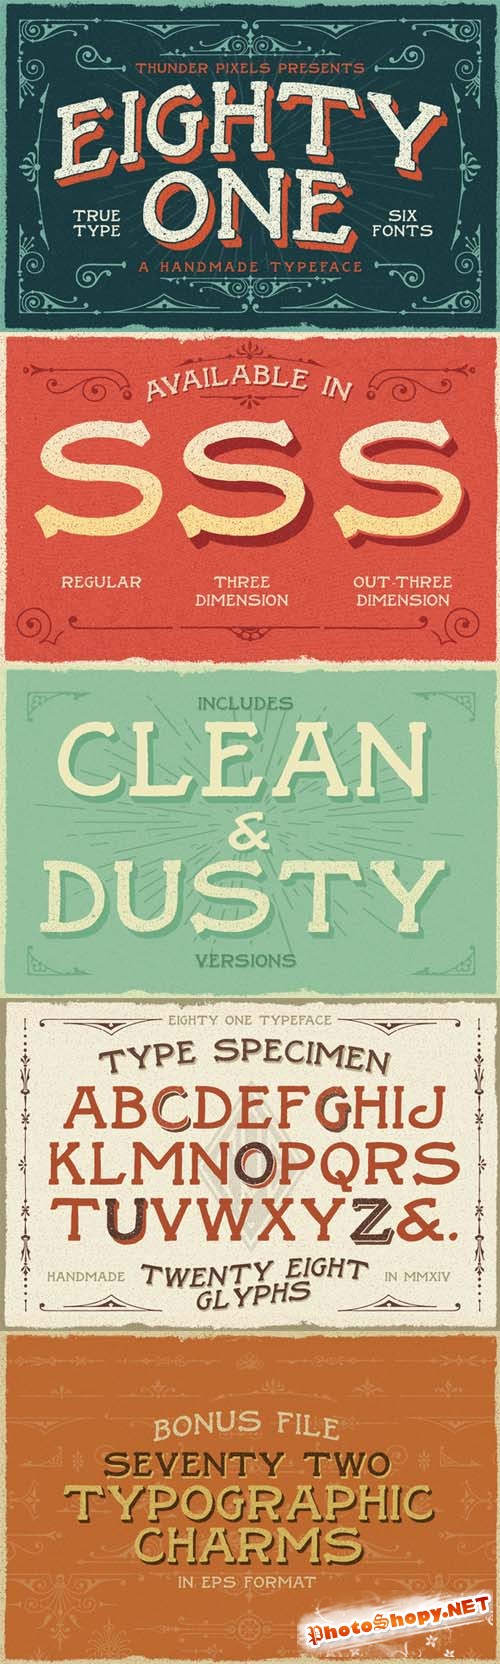 Eighty One Typeface Font